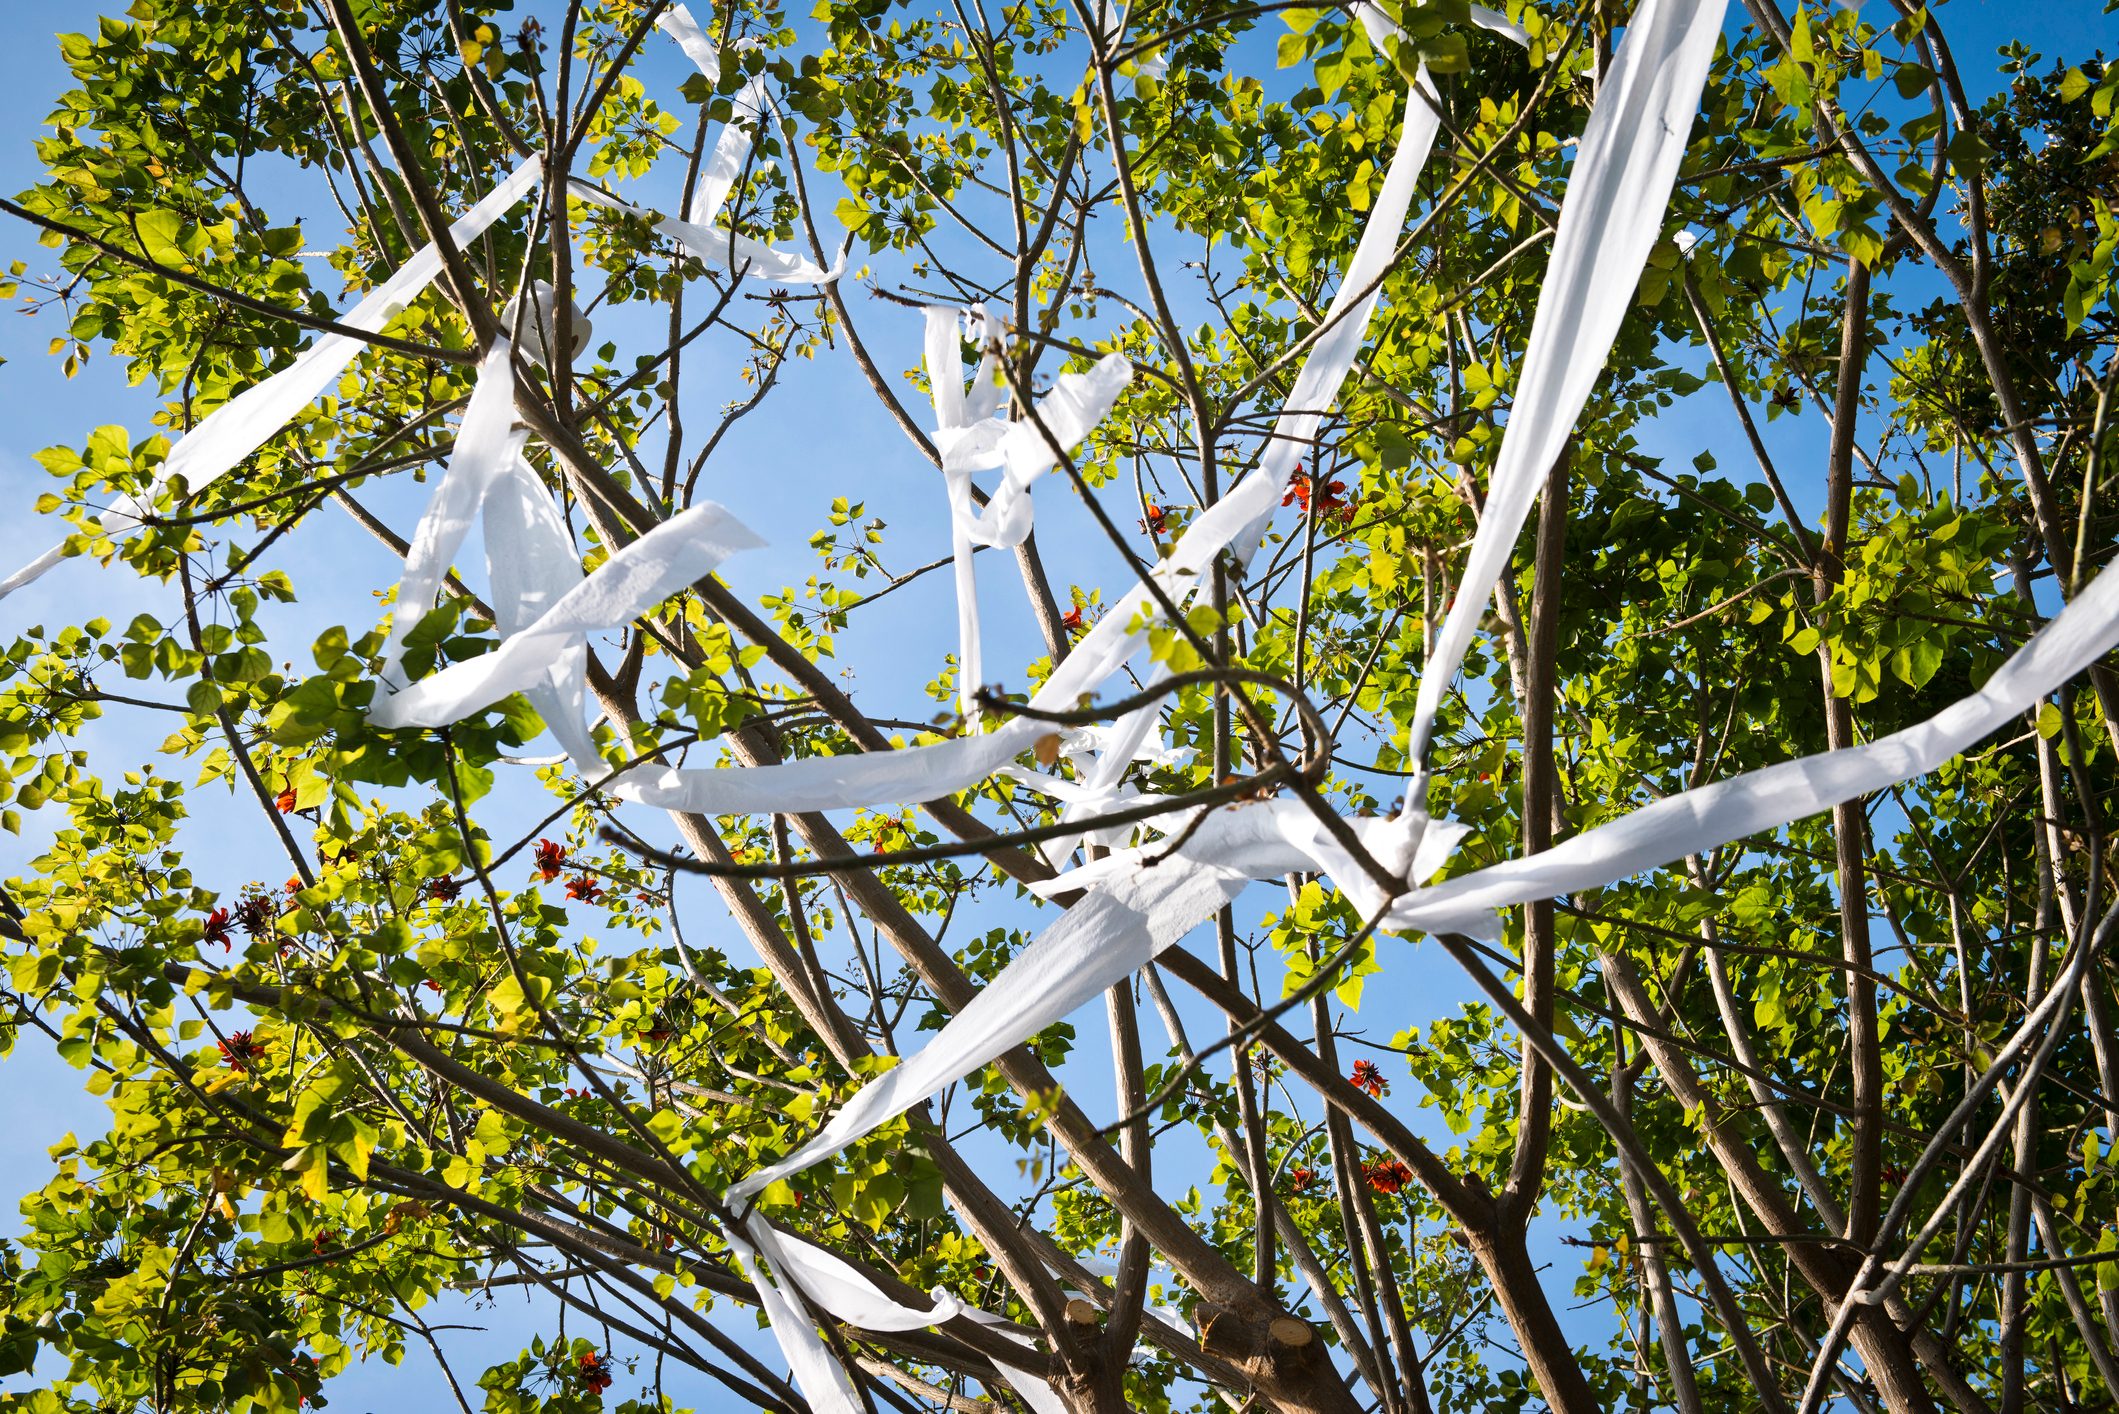 How To Get Toilet Paper Out of Trees